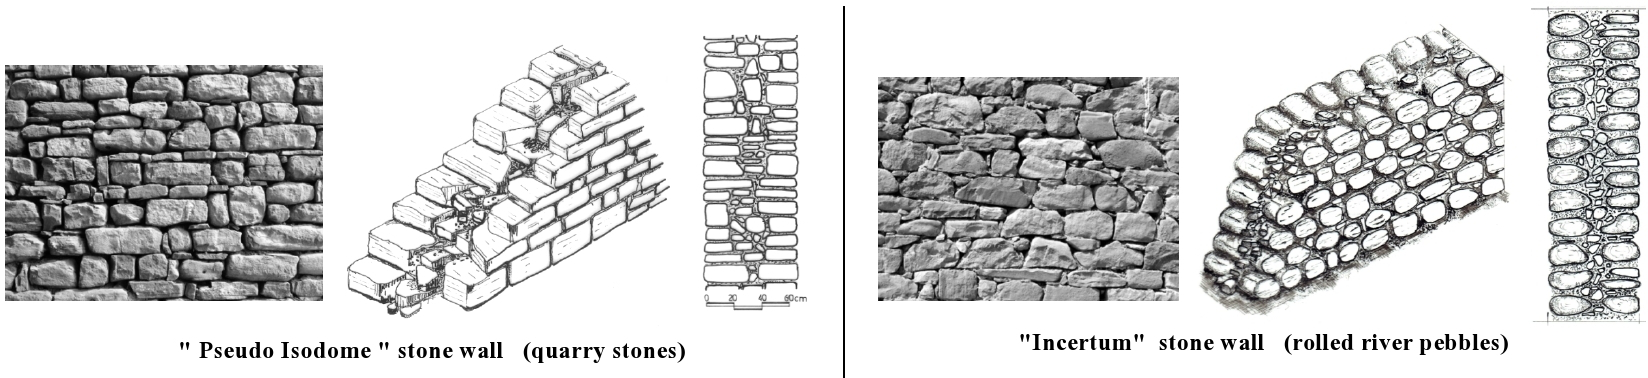 Typological variety of walls